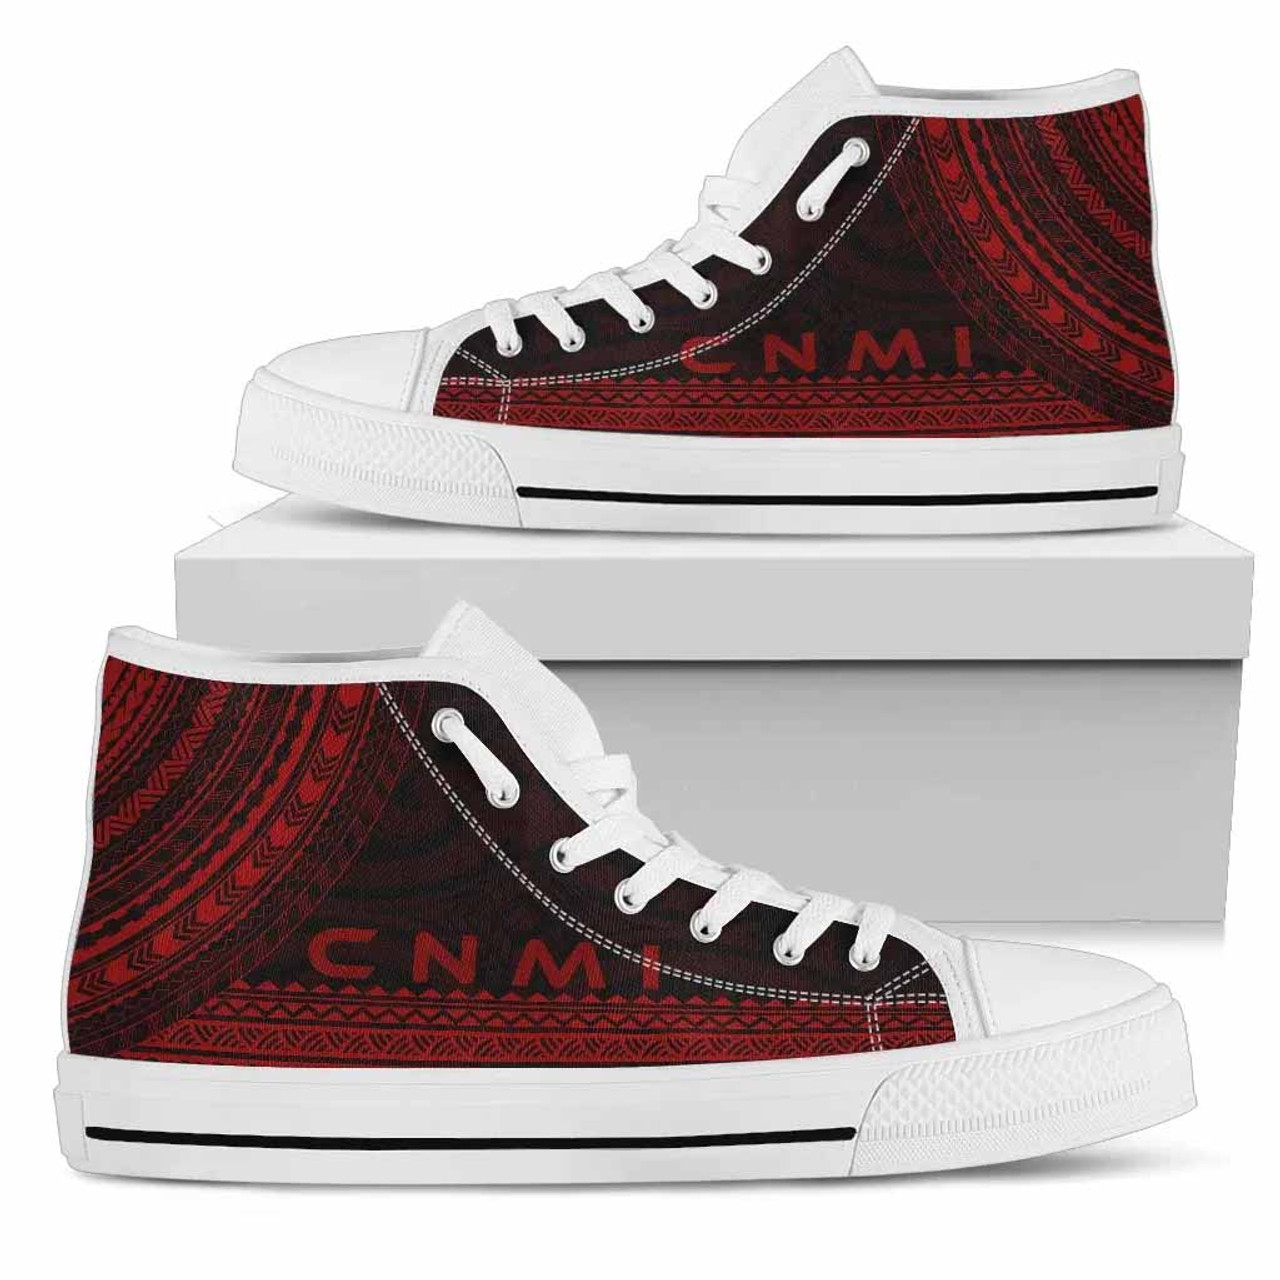 Northern Mariana Islands High Top Shoes - Polynesian Red Chief Version 3